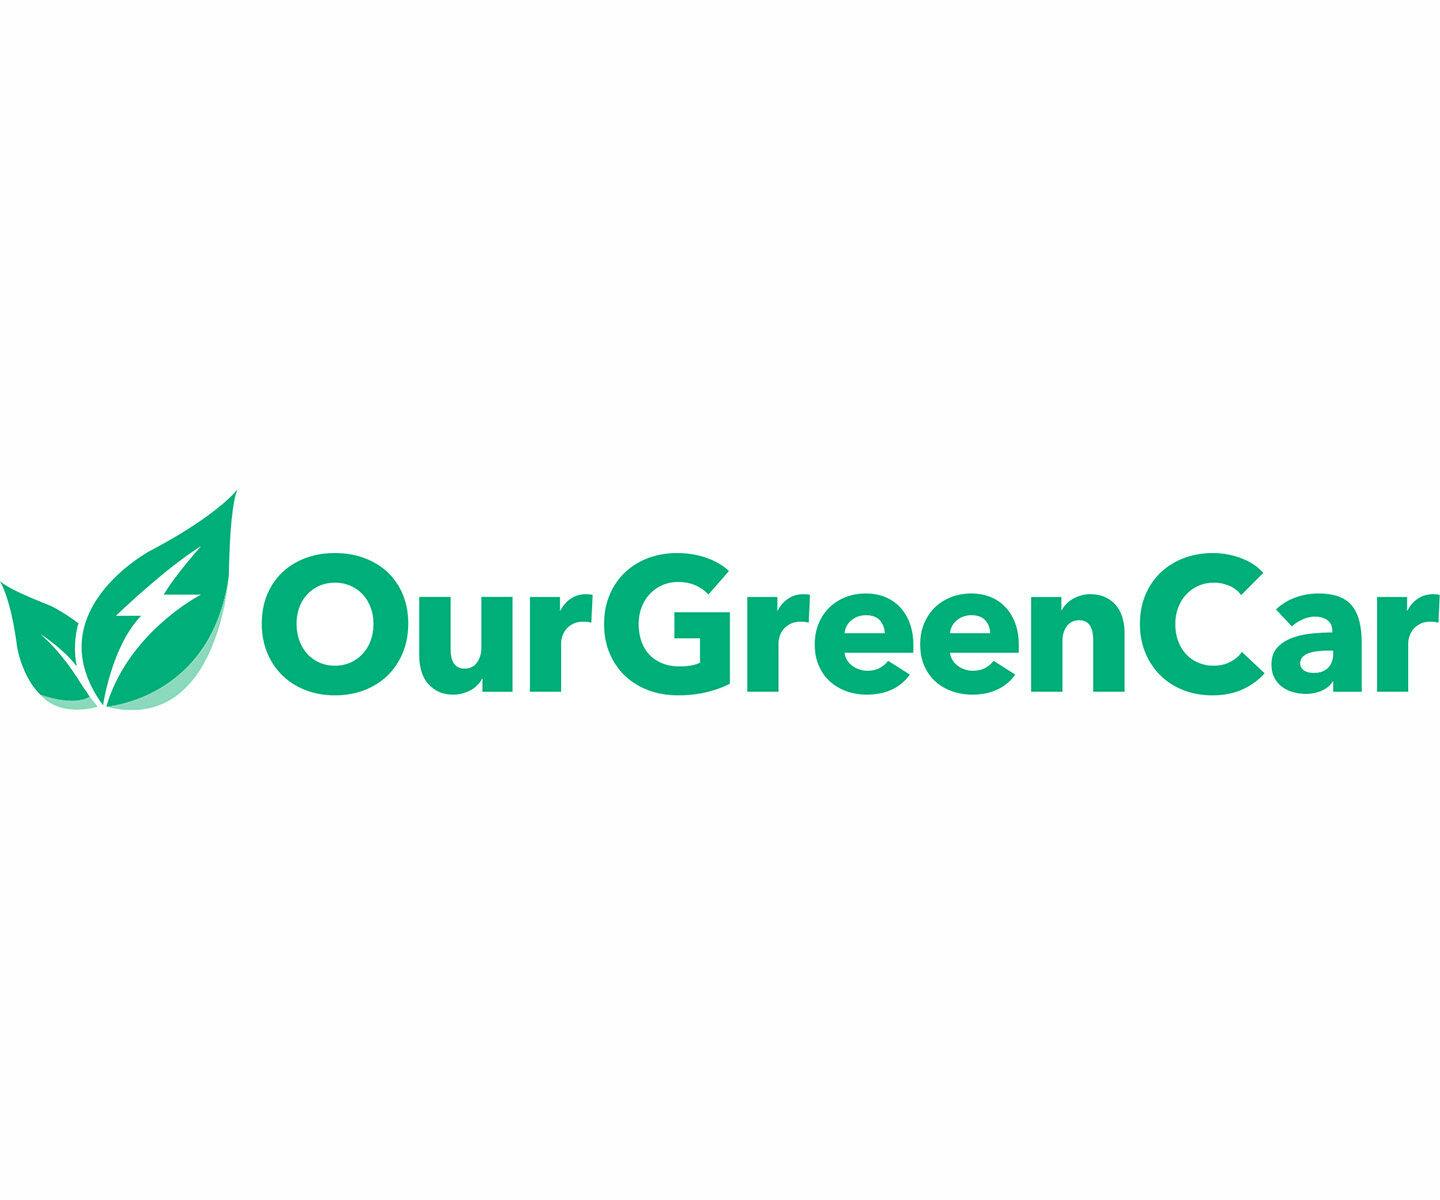 Logotyp OurGreenCar